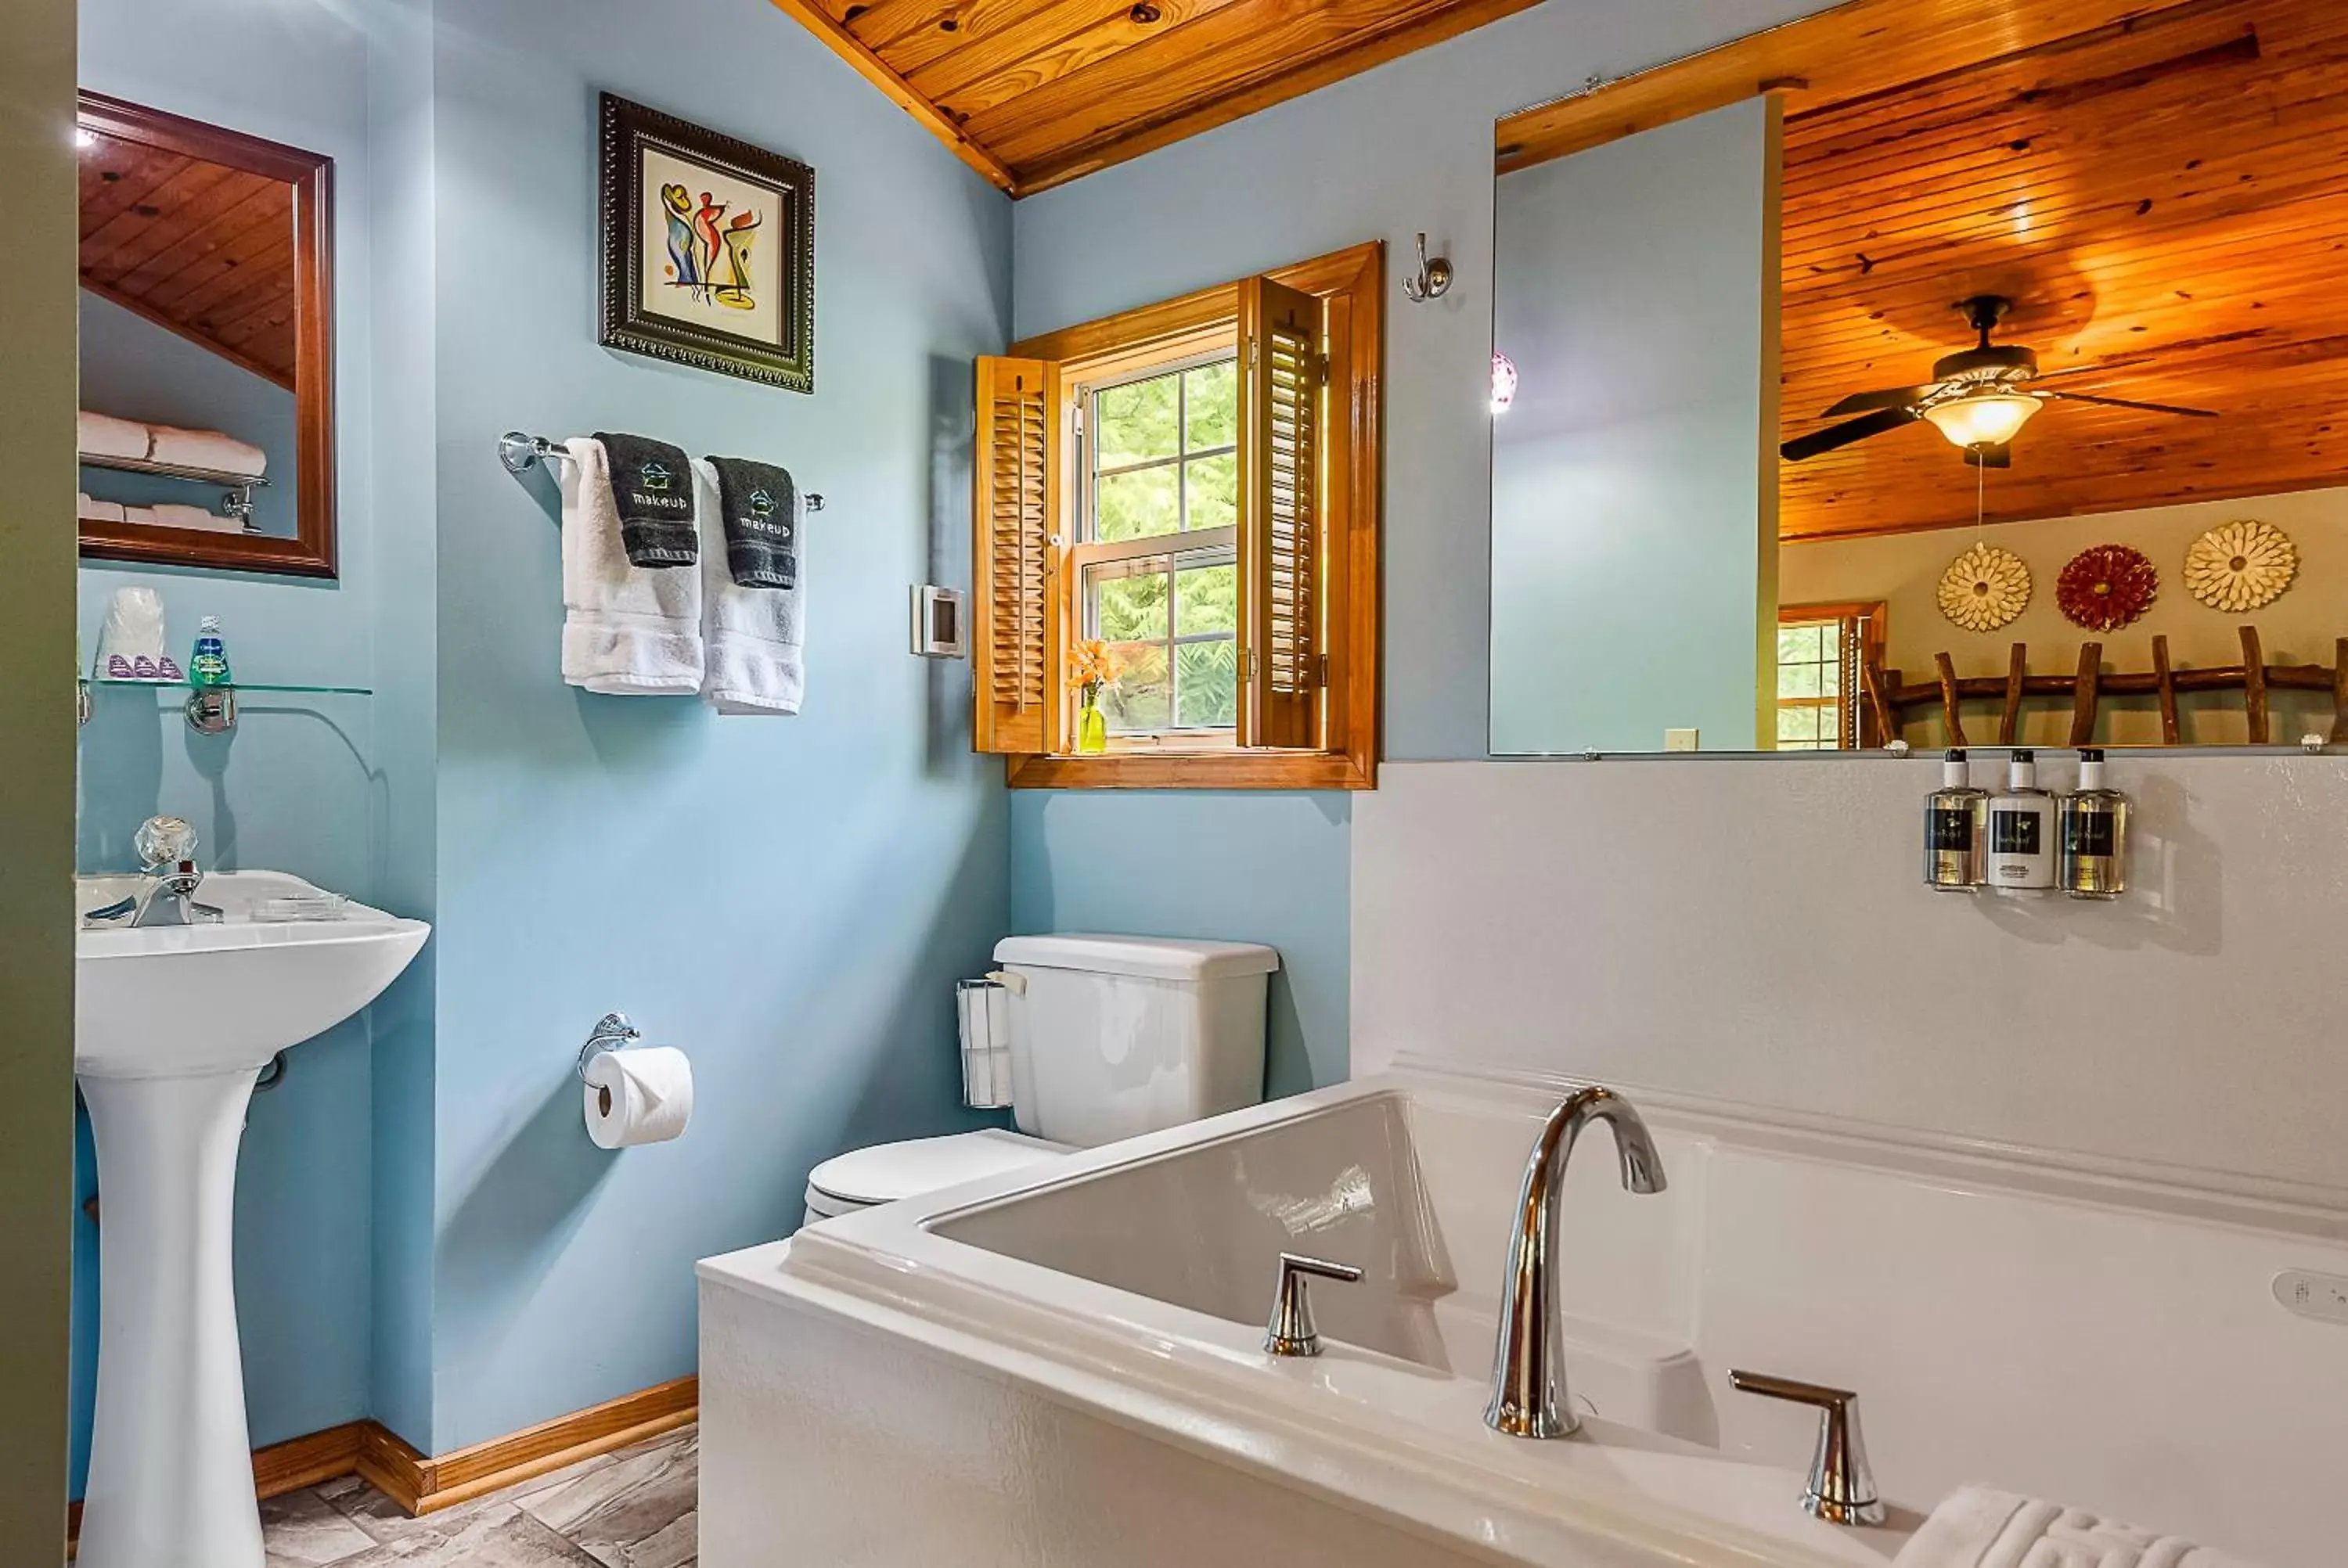 Bathroom in The Woods Cabins